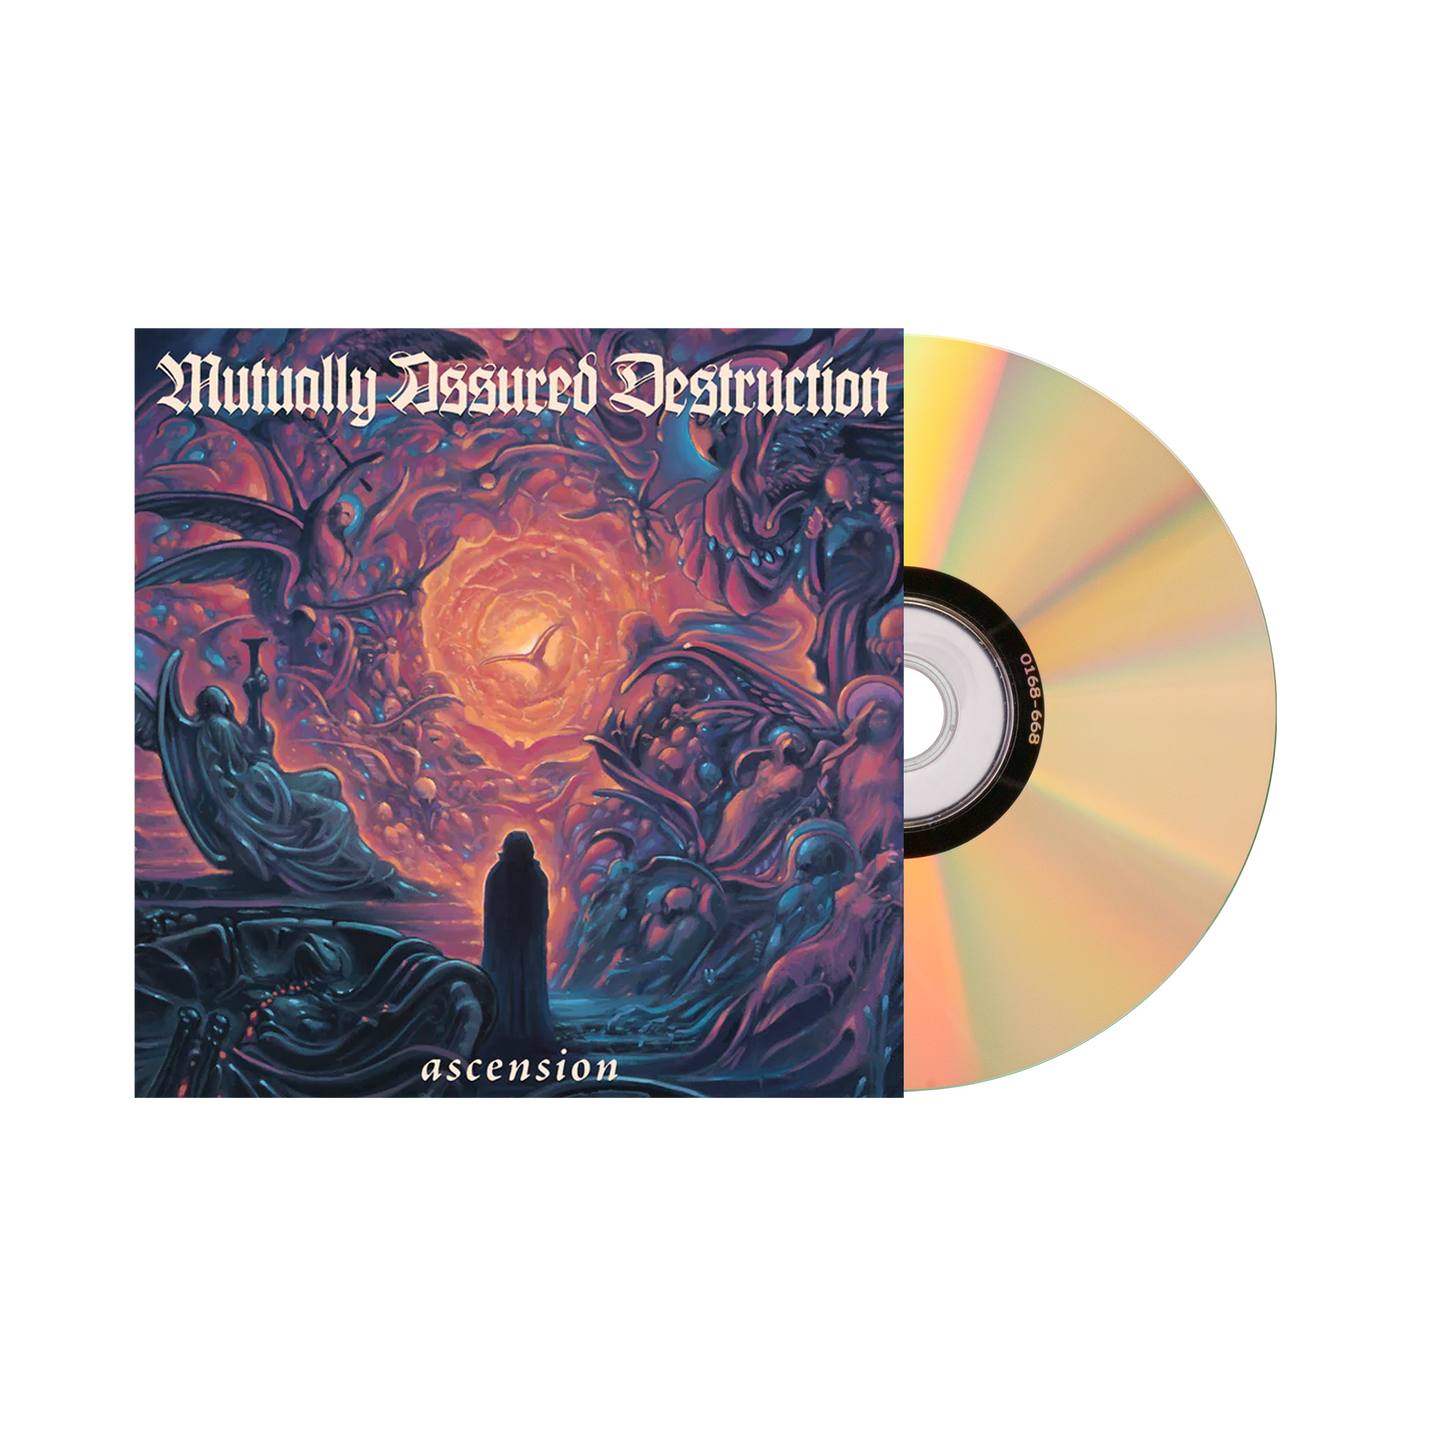 Mutually Assured Destruction "Ascension" CD